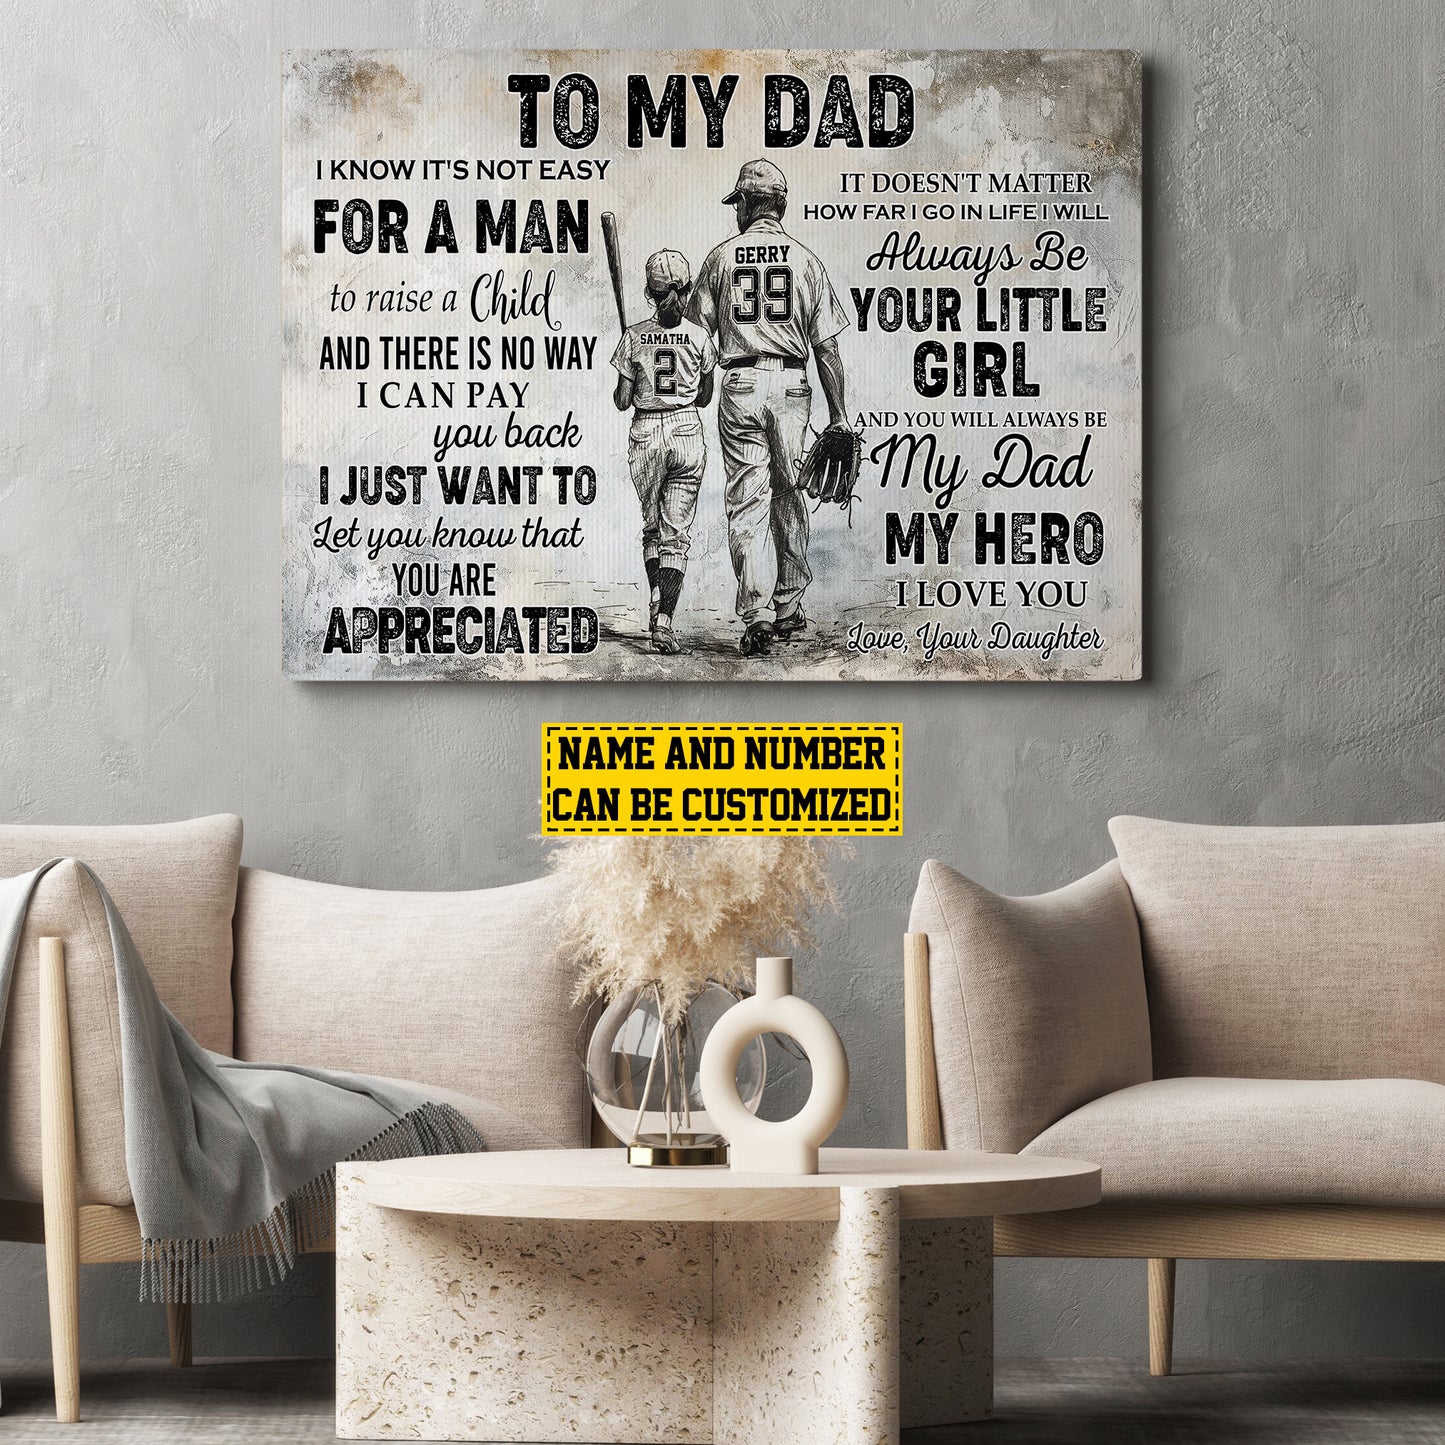 To My Dad Your Little Girl I Love You, Personalized Motivational Softball Girl Canvas Painting, Inspirational Quotes Softball Wall Art Decor, Fathers Day Poster Gift For Dad From Daughter